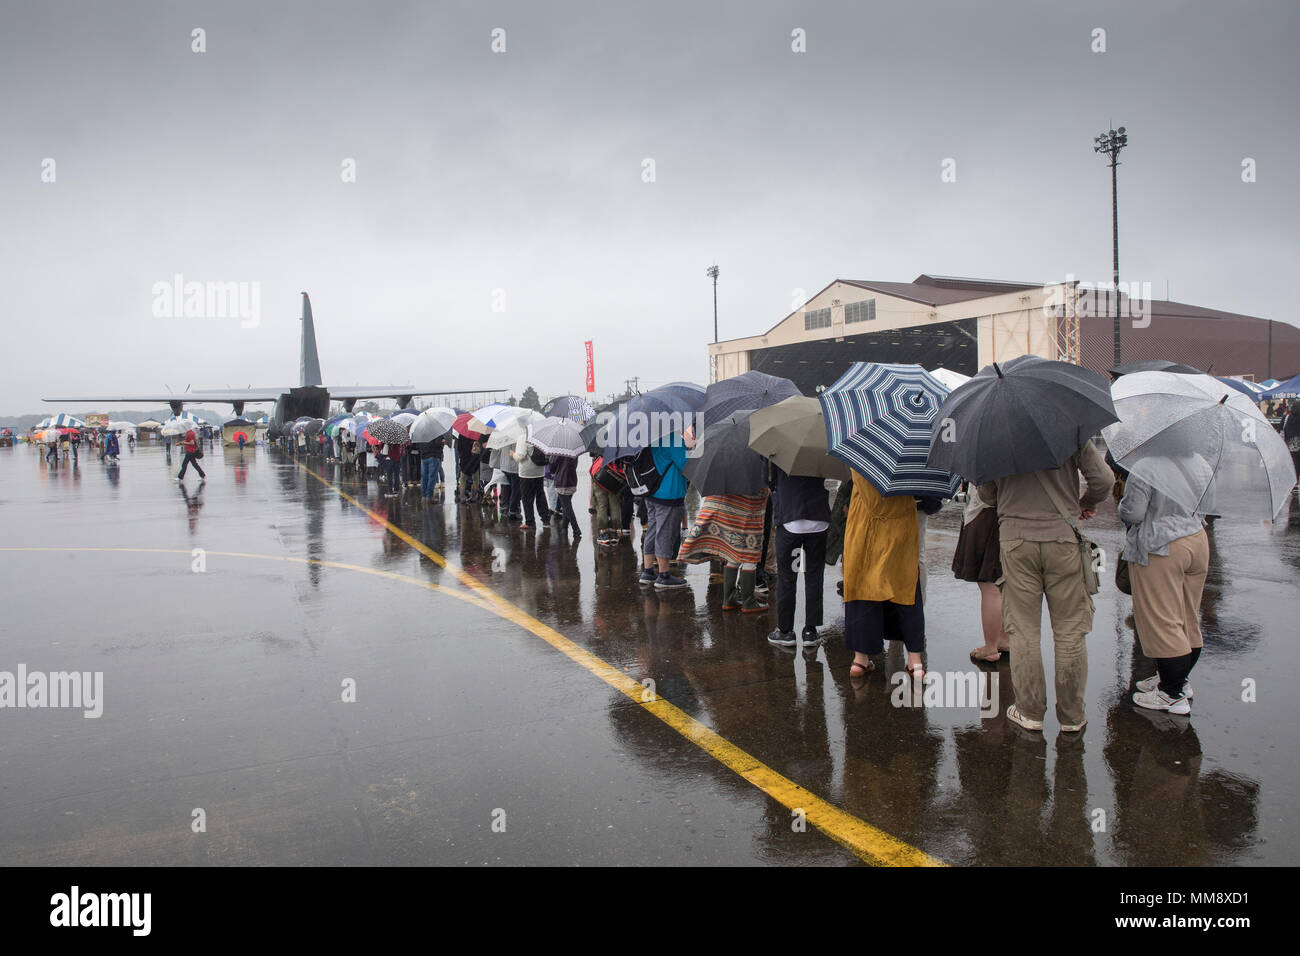 Spectators wait in line to enter a C-130J Super Hercules during the 2017 Japanese-American Friendship Festival at Yokota Air Base, Japan, Sept. 17, 2017. This is the first time that Yokota's new C-130J was displayed during the festival. (U.S. Air Force photo by Yasuo Osakabe) Stock Photo